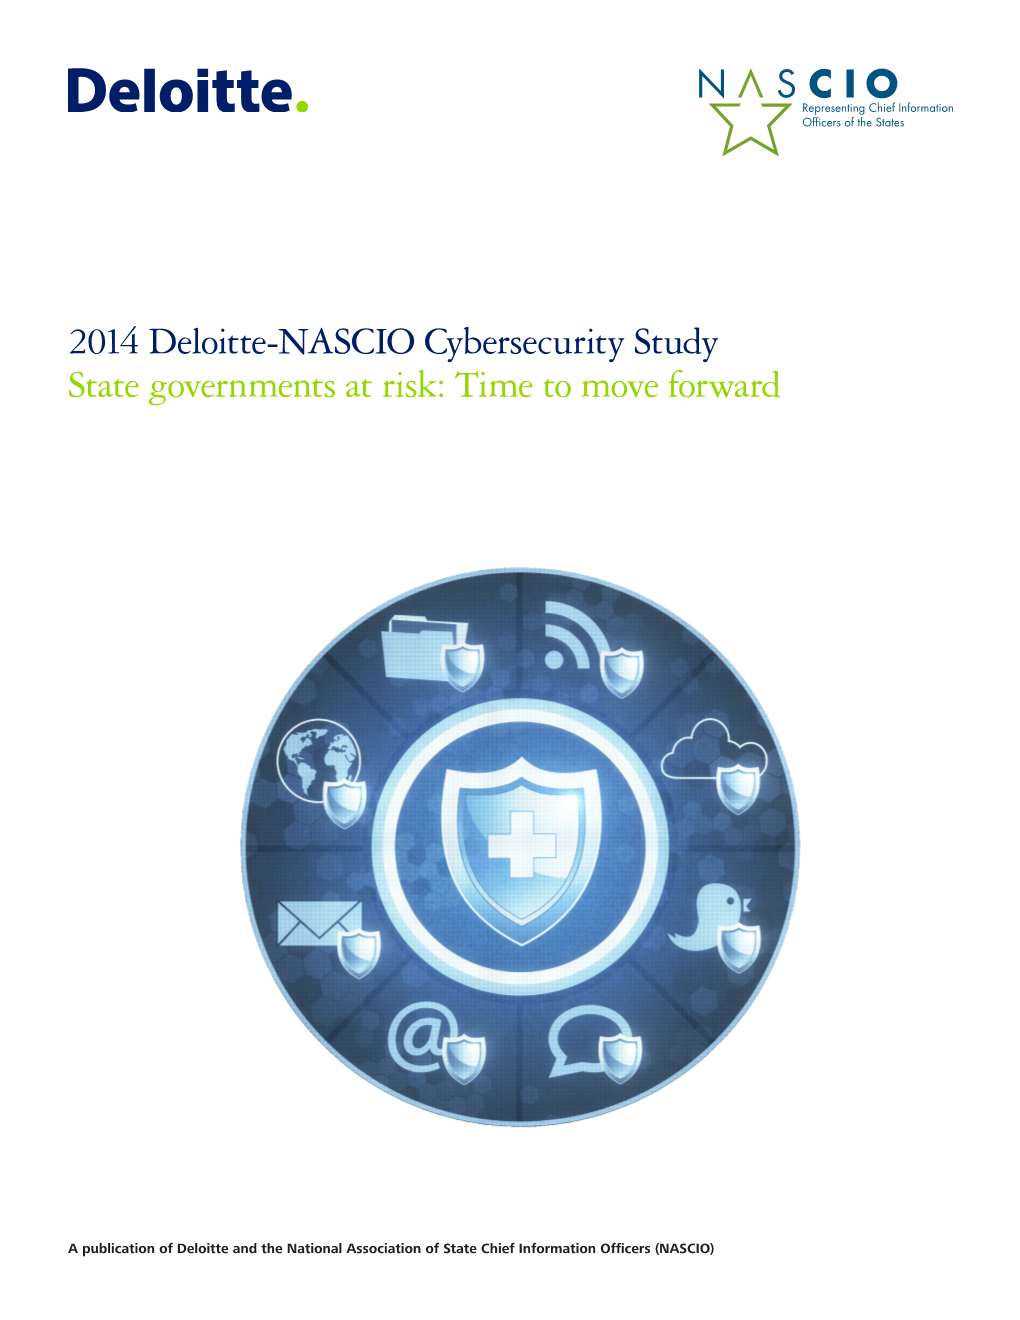 2014 Deloitte-NASCIO Cybersecurity Study State Governments at Risk: Time to Move Forward